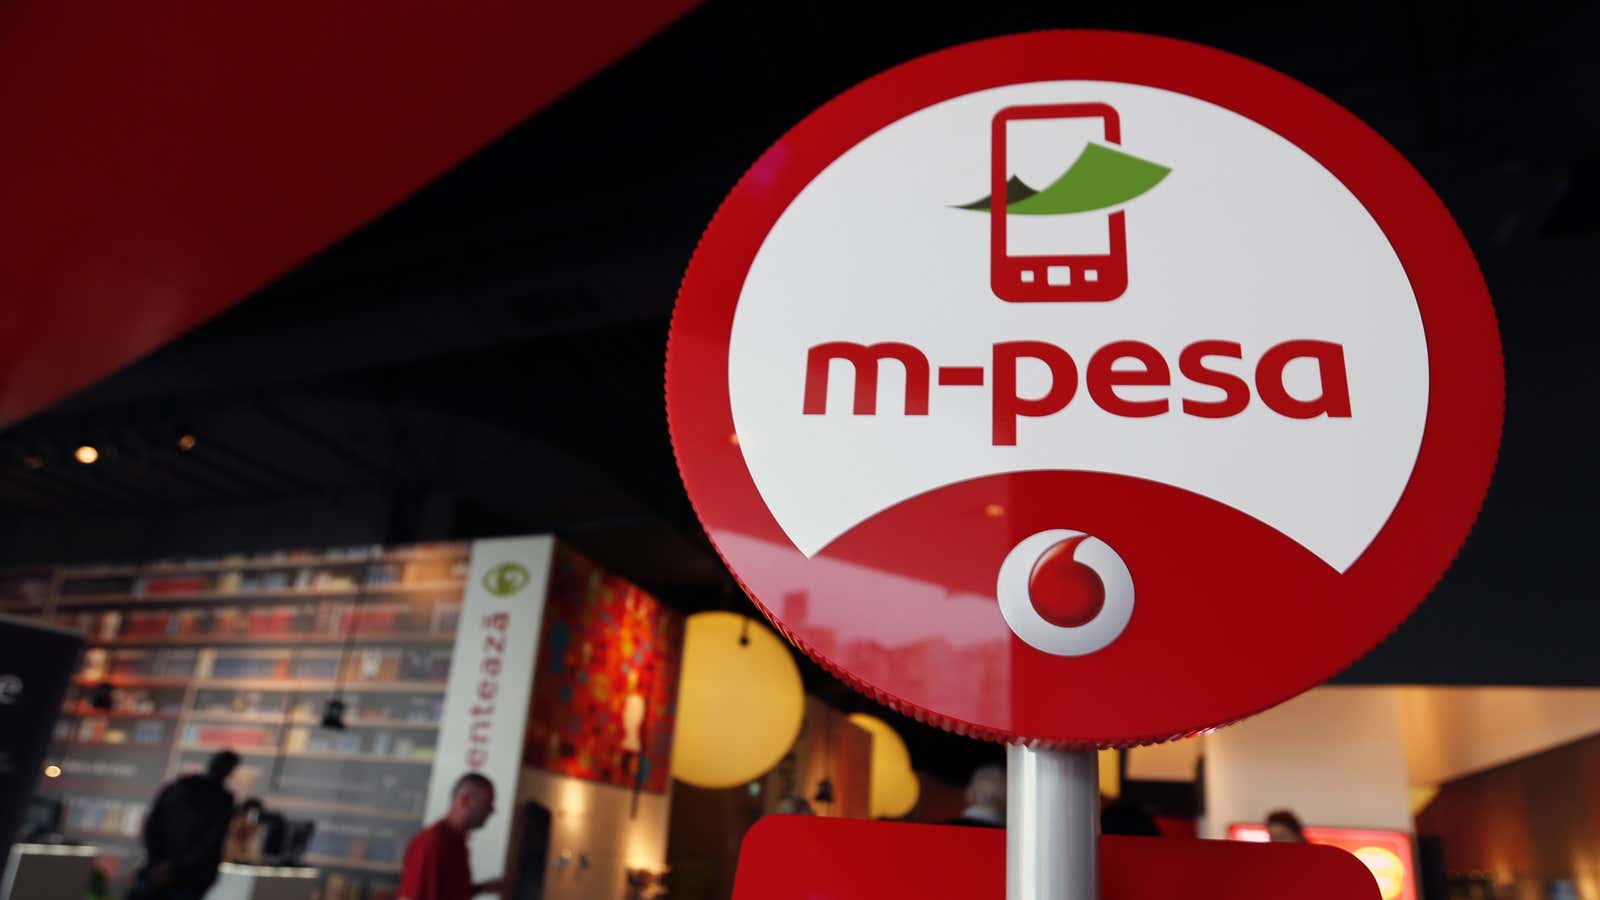 In South Africa, the popular mobile-money platform, Mpesa, is struggling to grow.